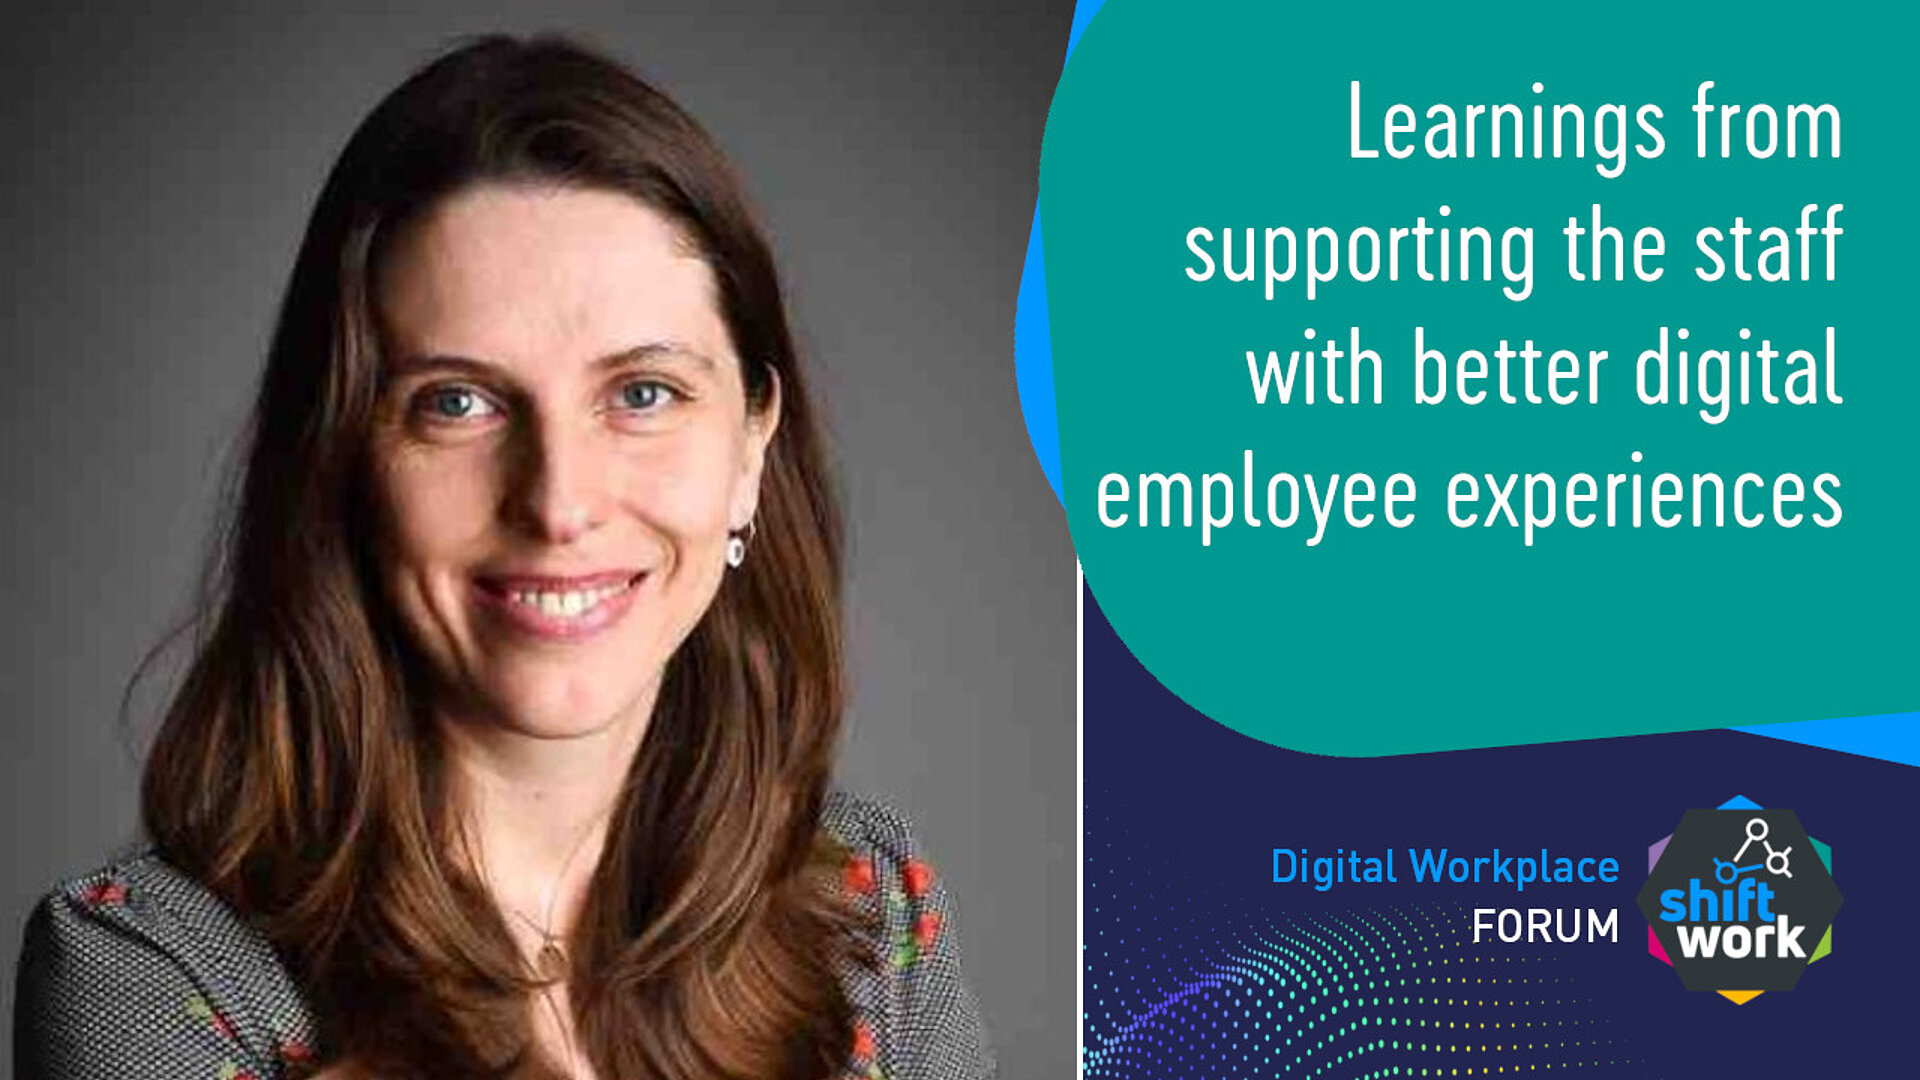 Learnings from supporting the staff with better digital employee experiences at COWI